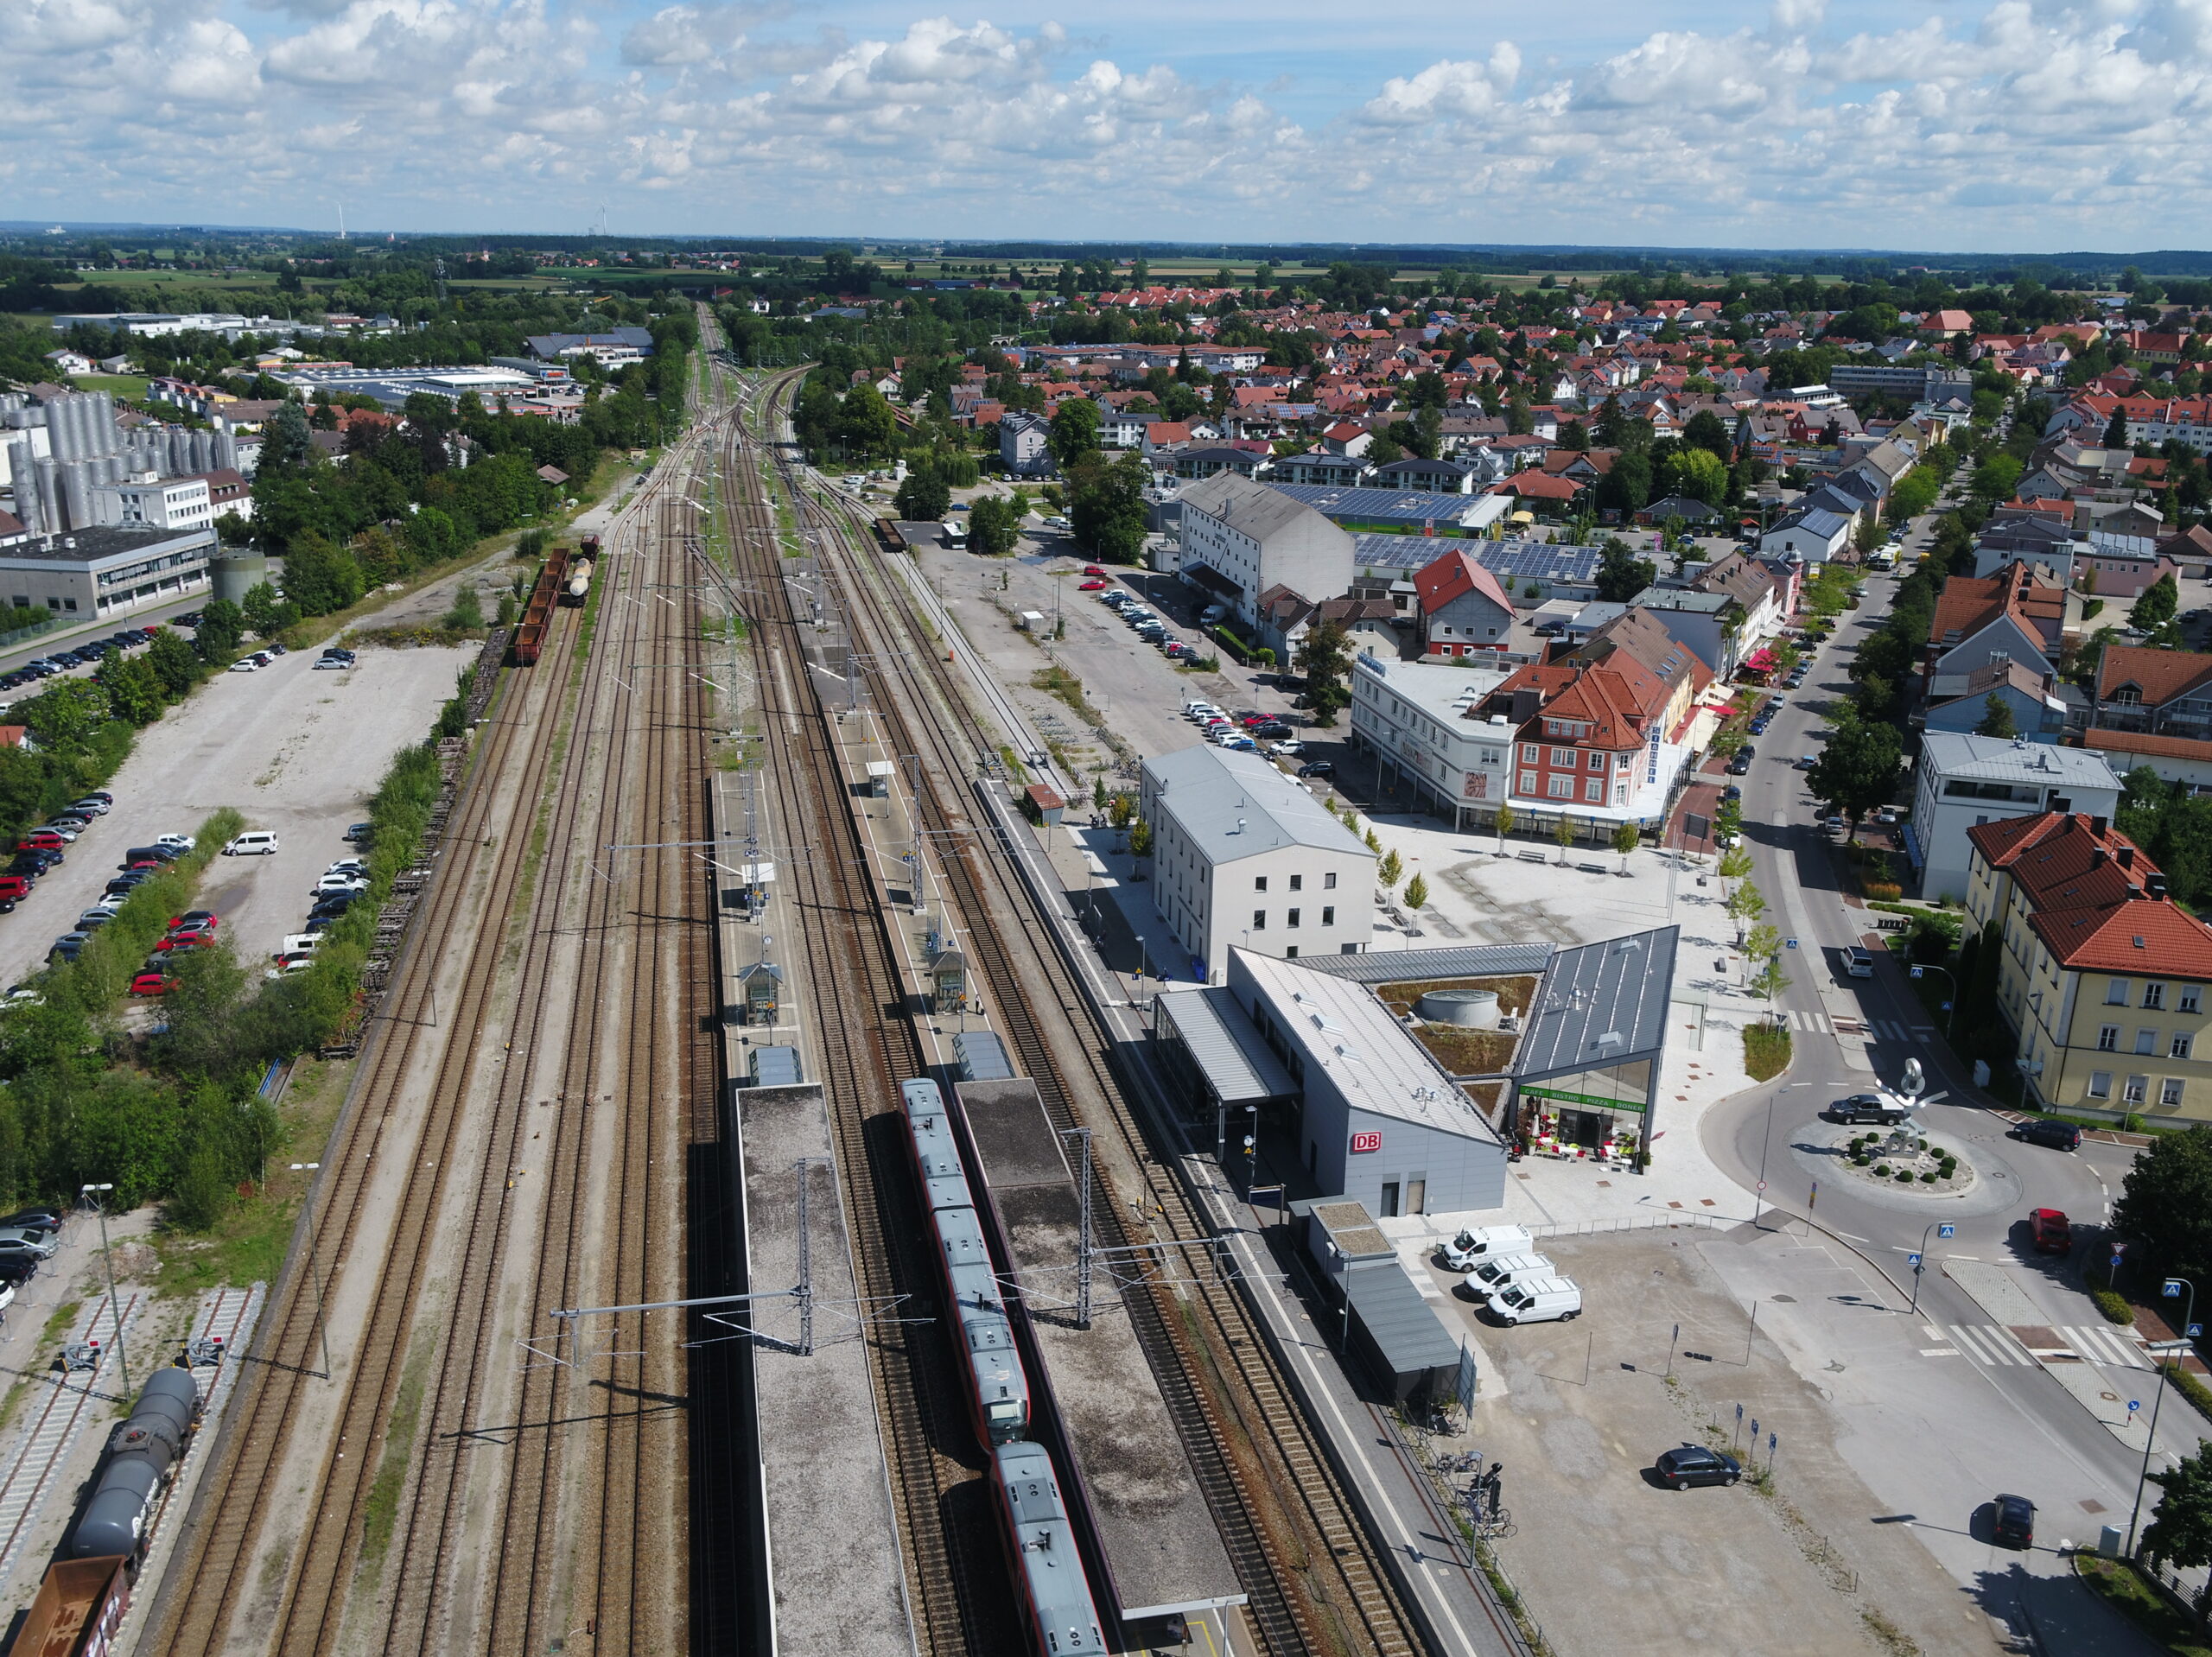 Rail Electrification - line upgrade 48 multicopter image 2 - central station Buchloe, Germany from above